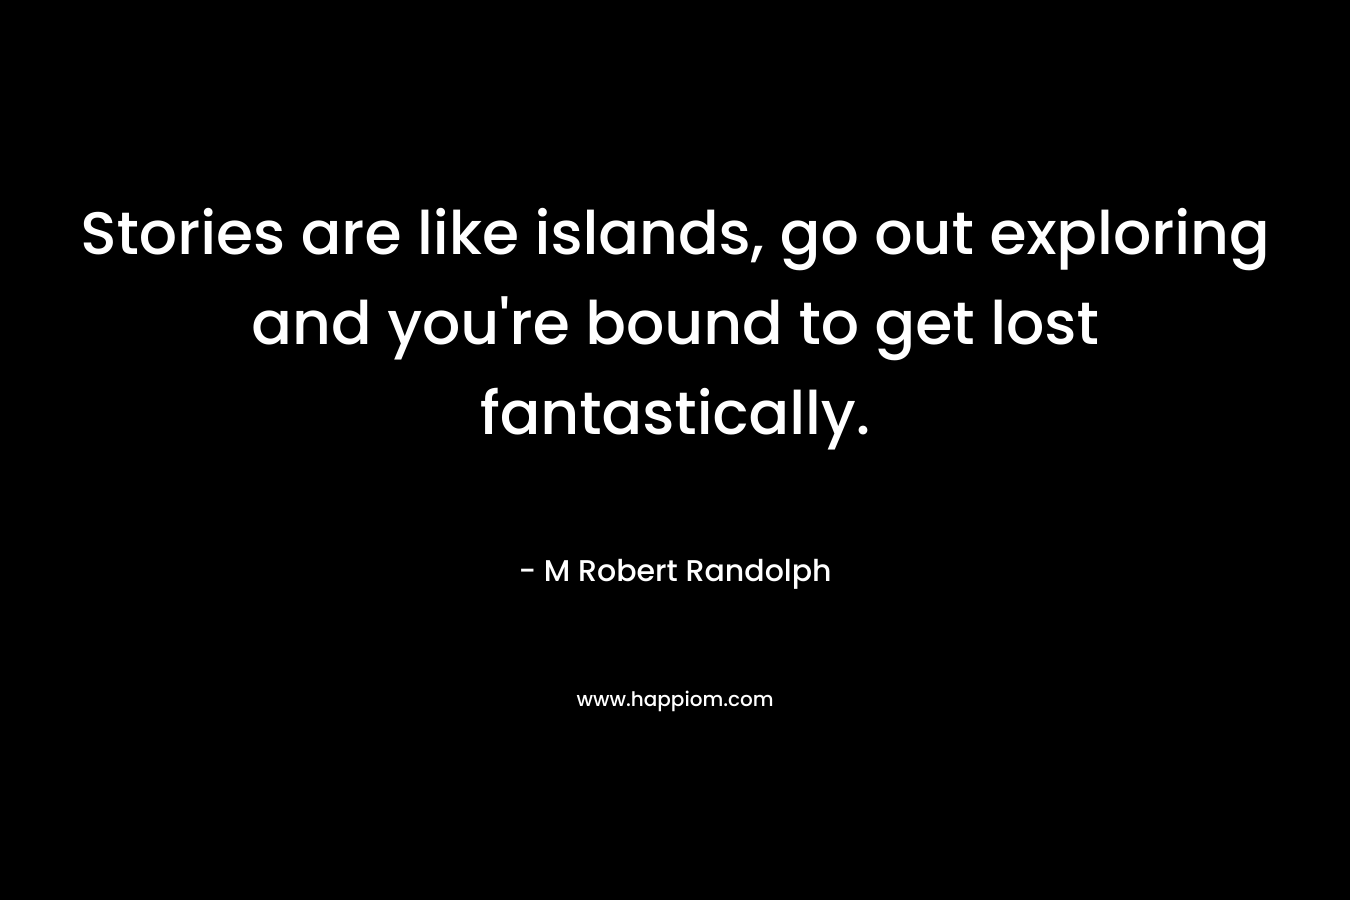 Stories are like islands, go out exploring and you're bound to get lost fantastically.